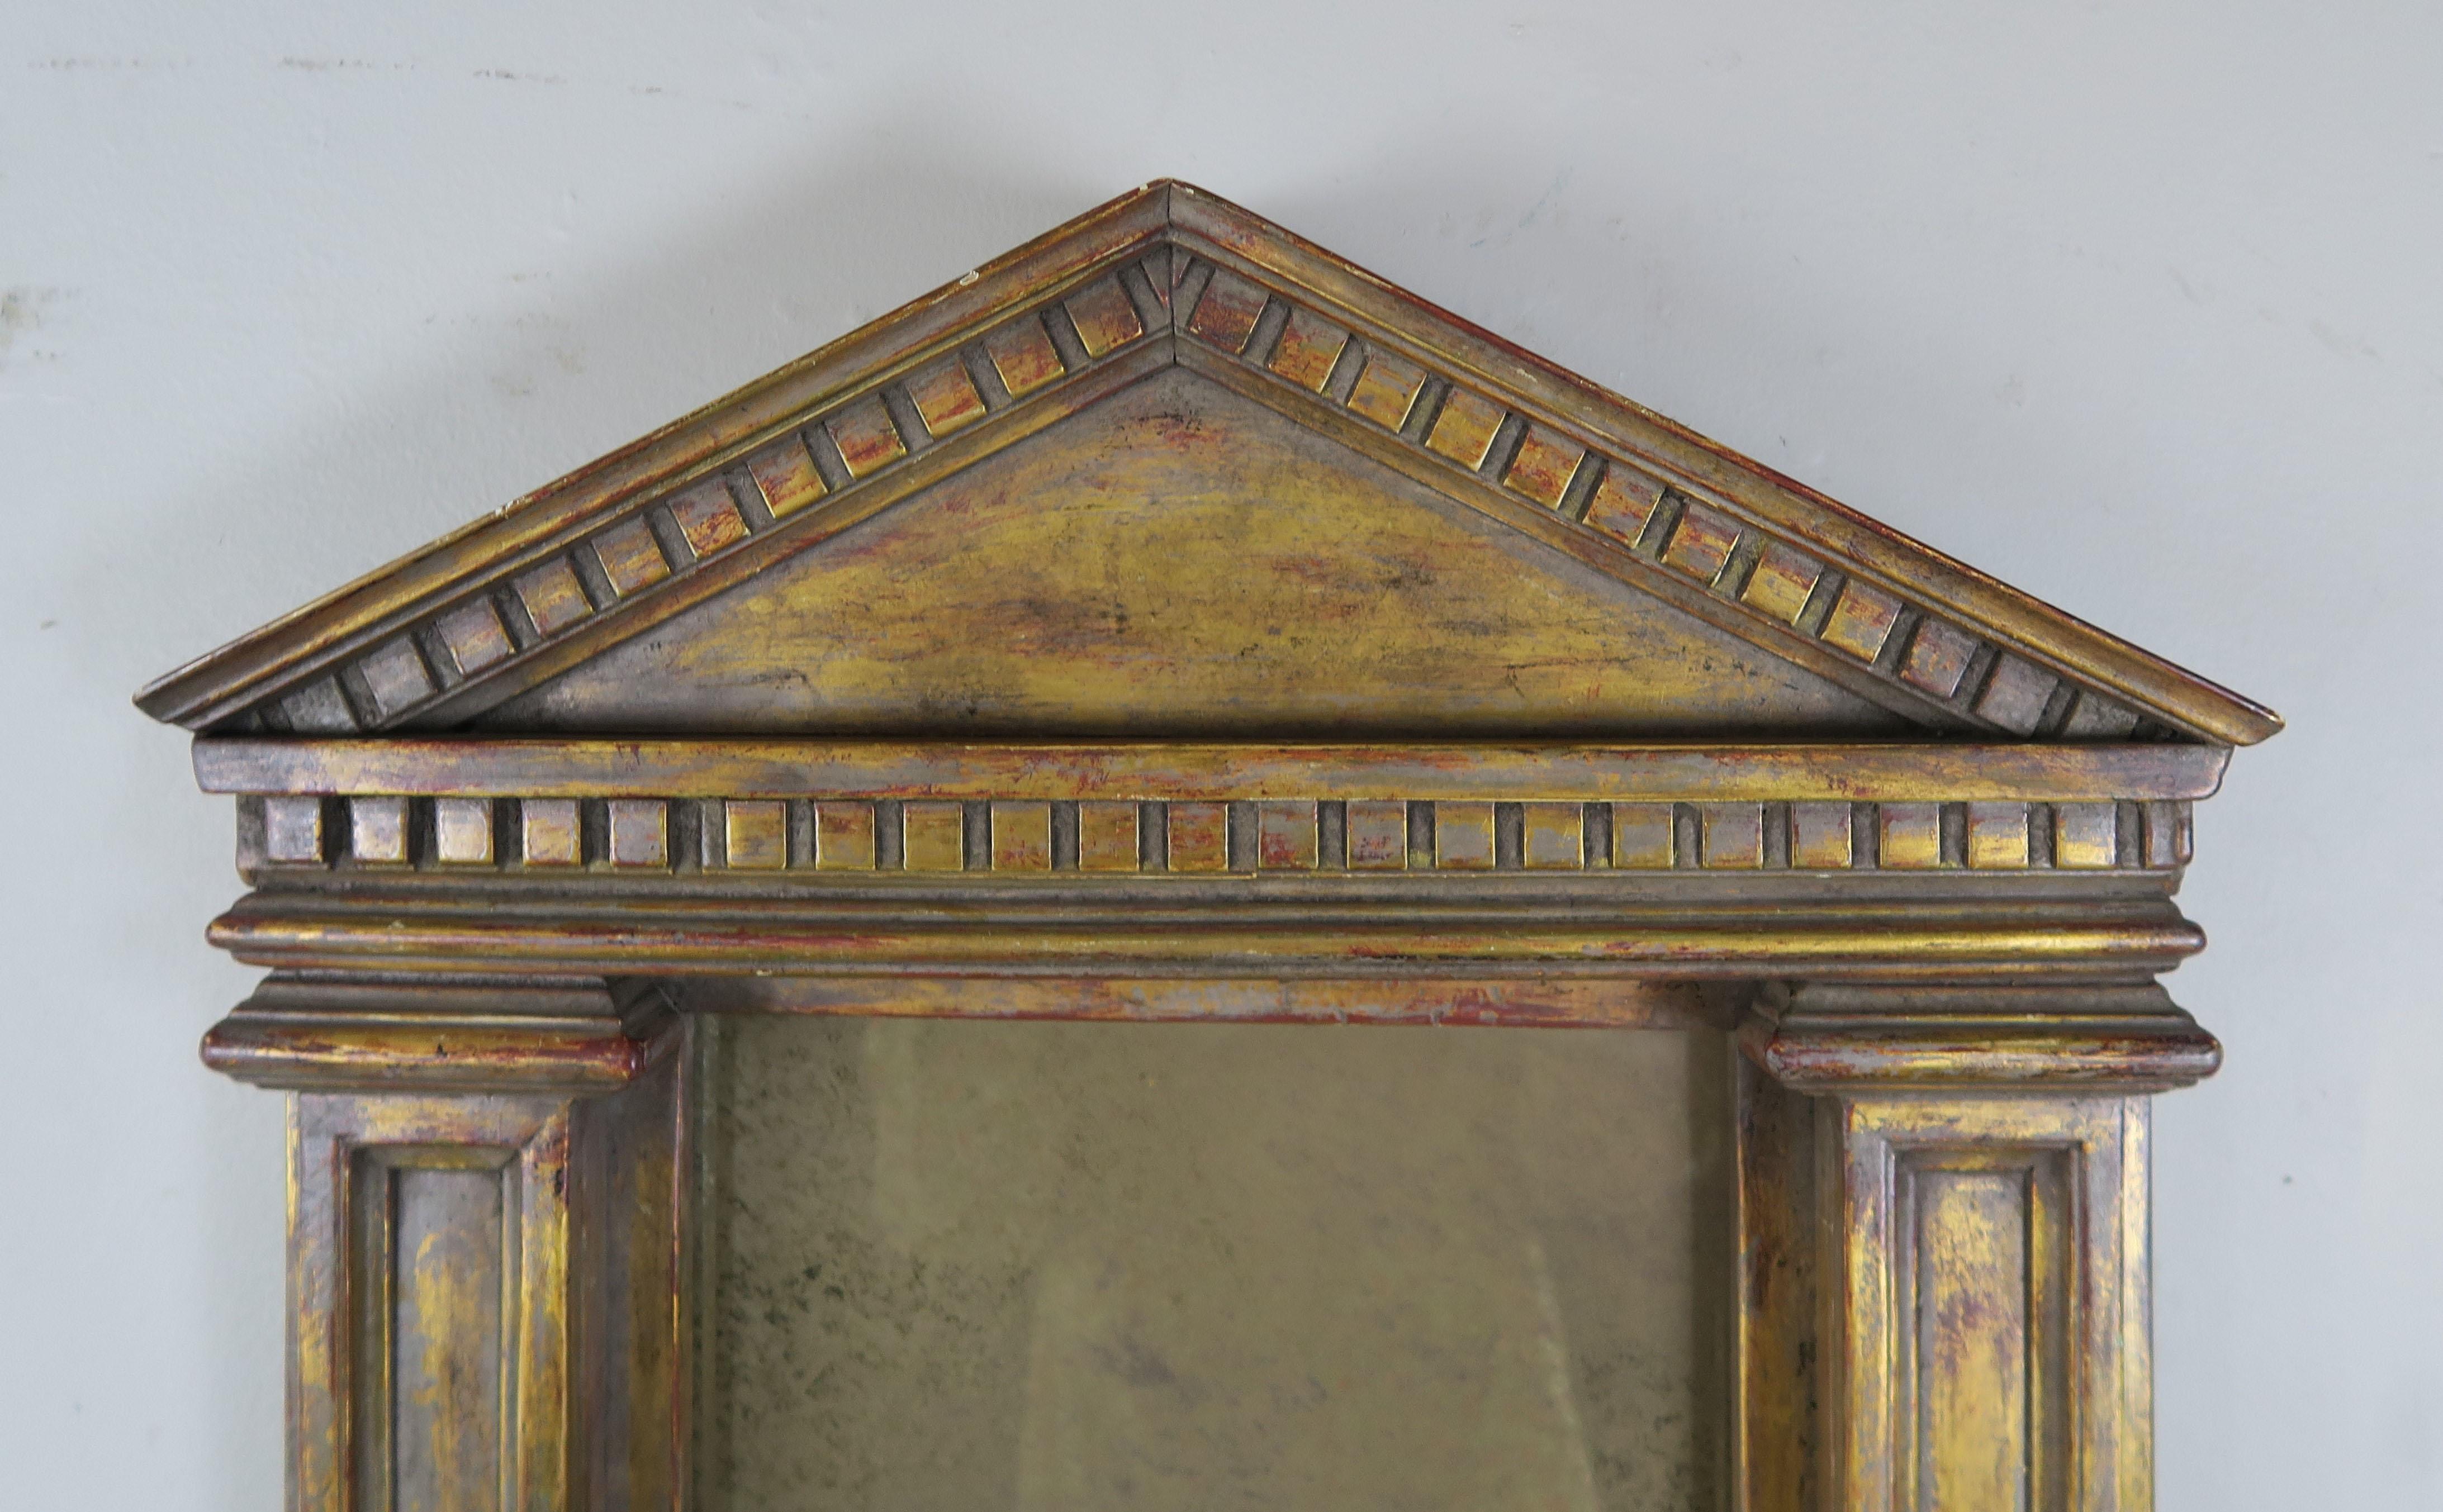 19th century Italian neoclassical style carved giltwood mirror in the shape of a portico. Aged smokey mirror from year of exposure. Distressed finish with missing gilt throughout.